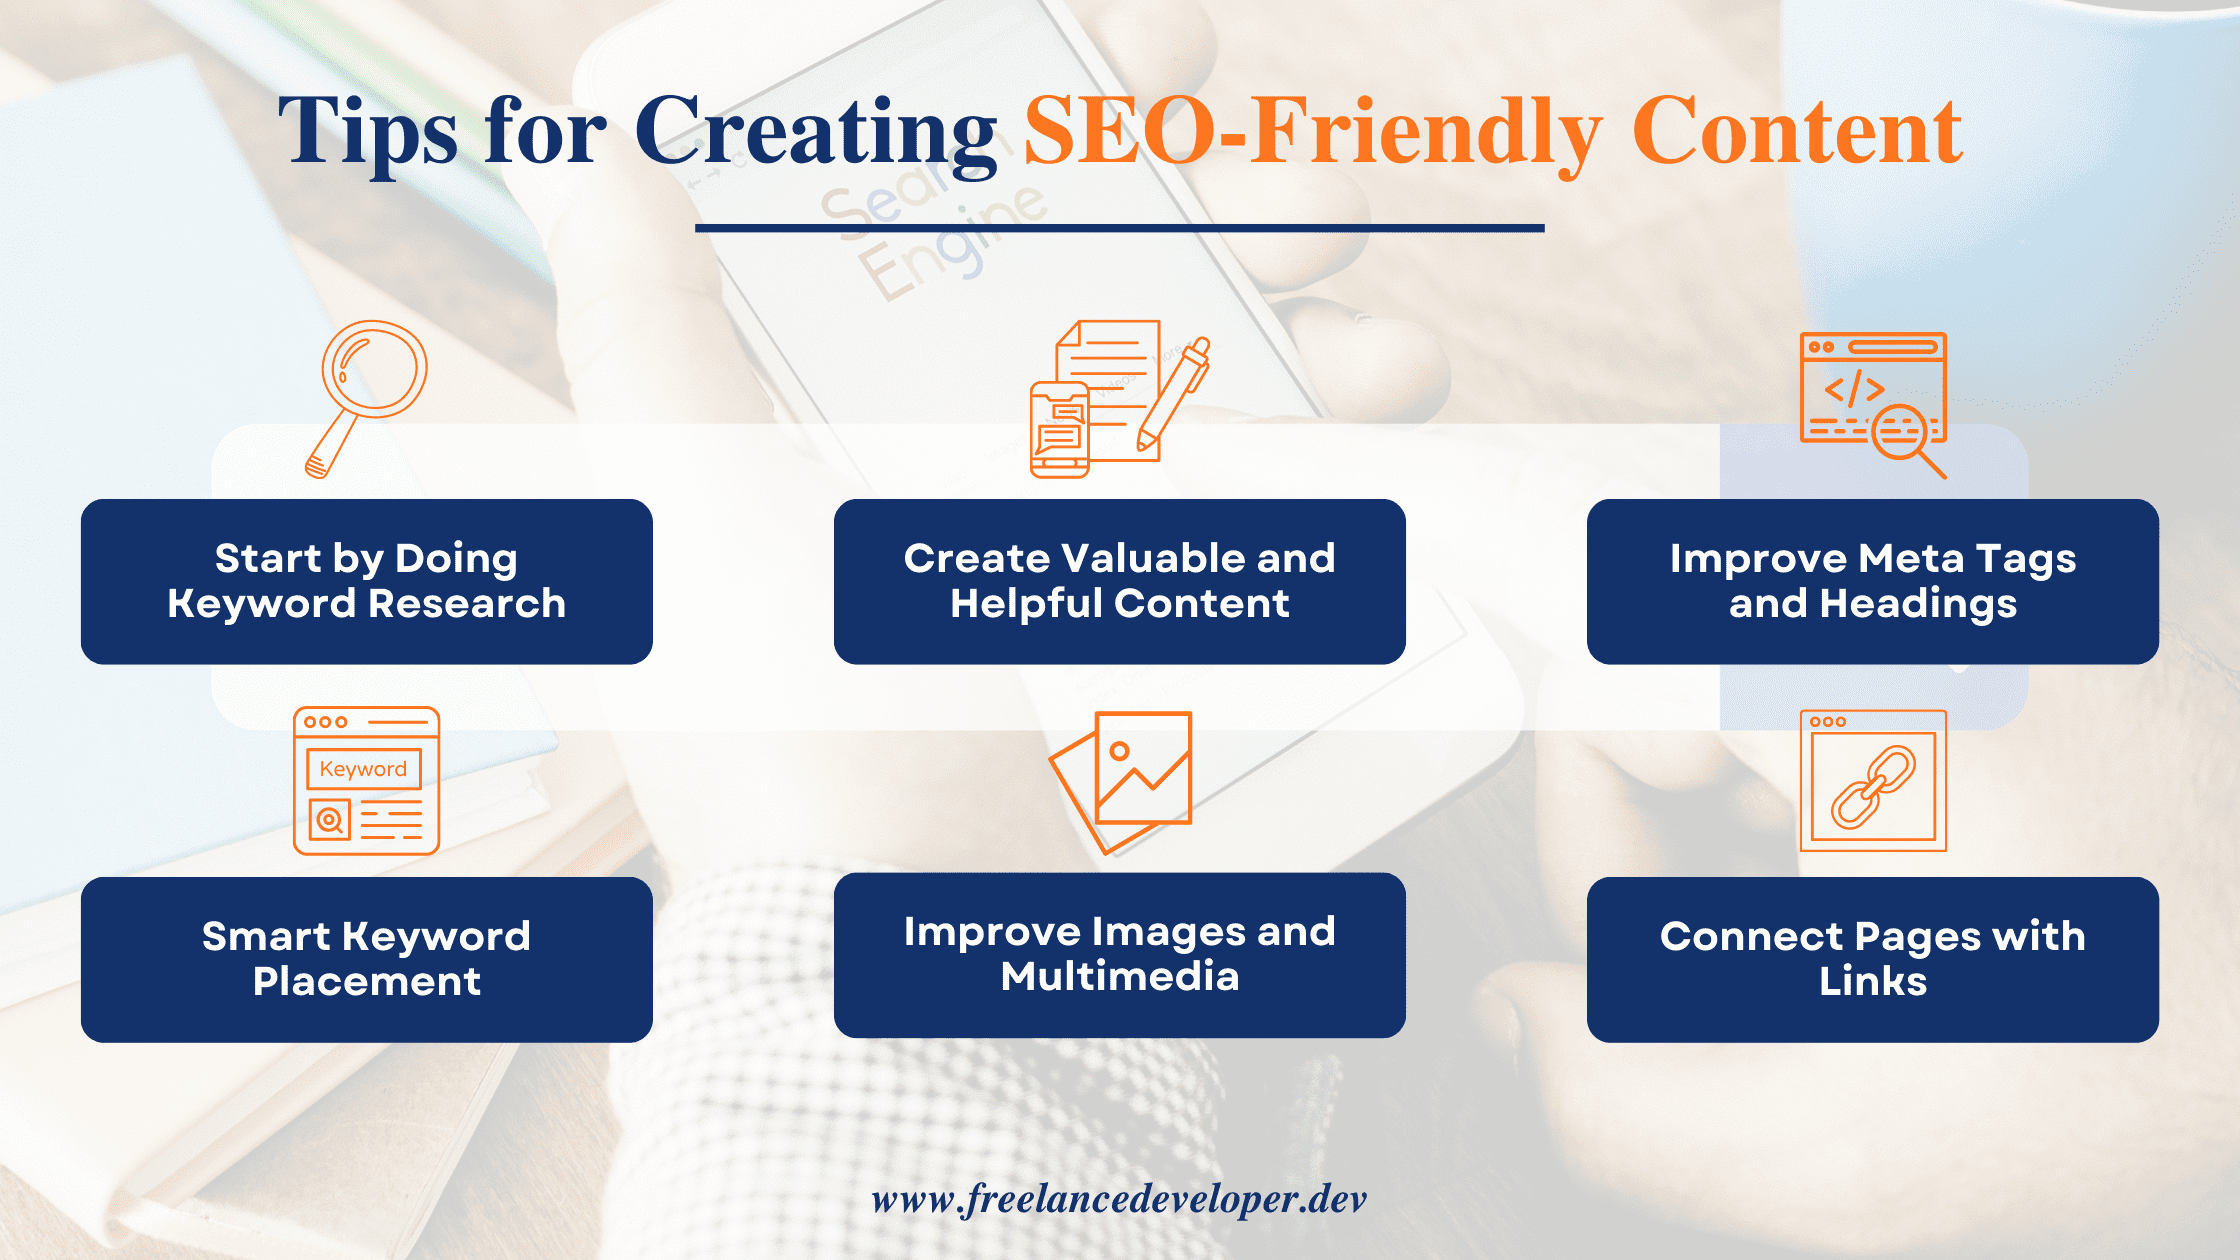 Tips for Creating SEO-Friendly Content